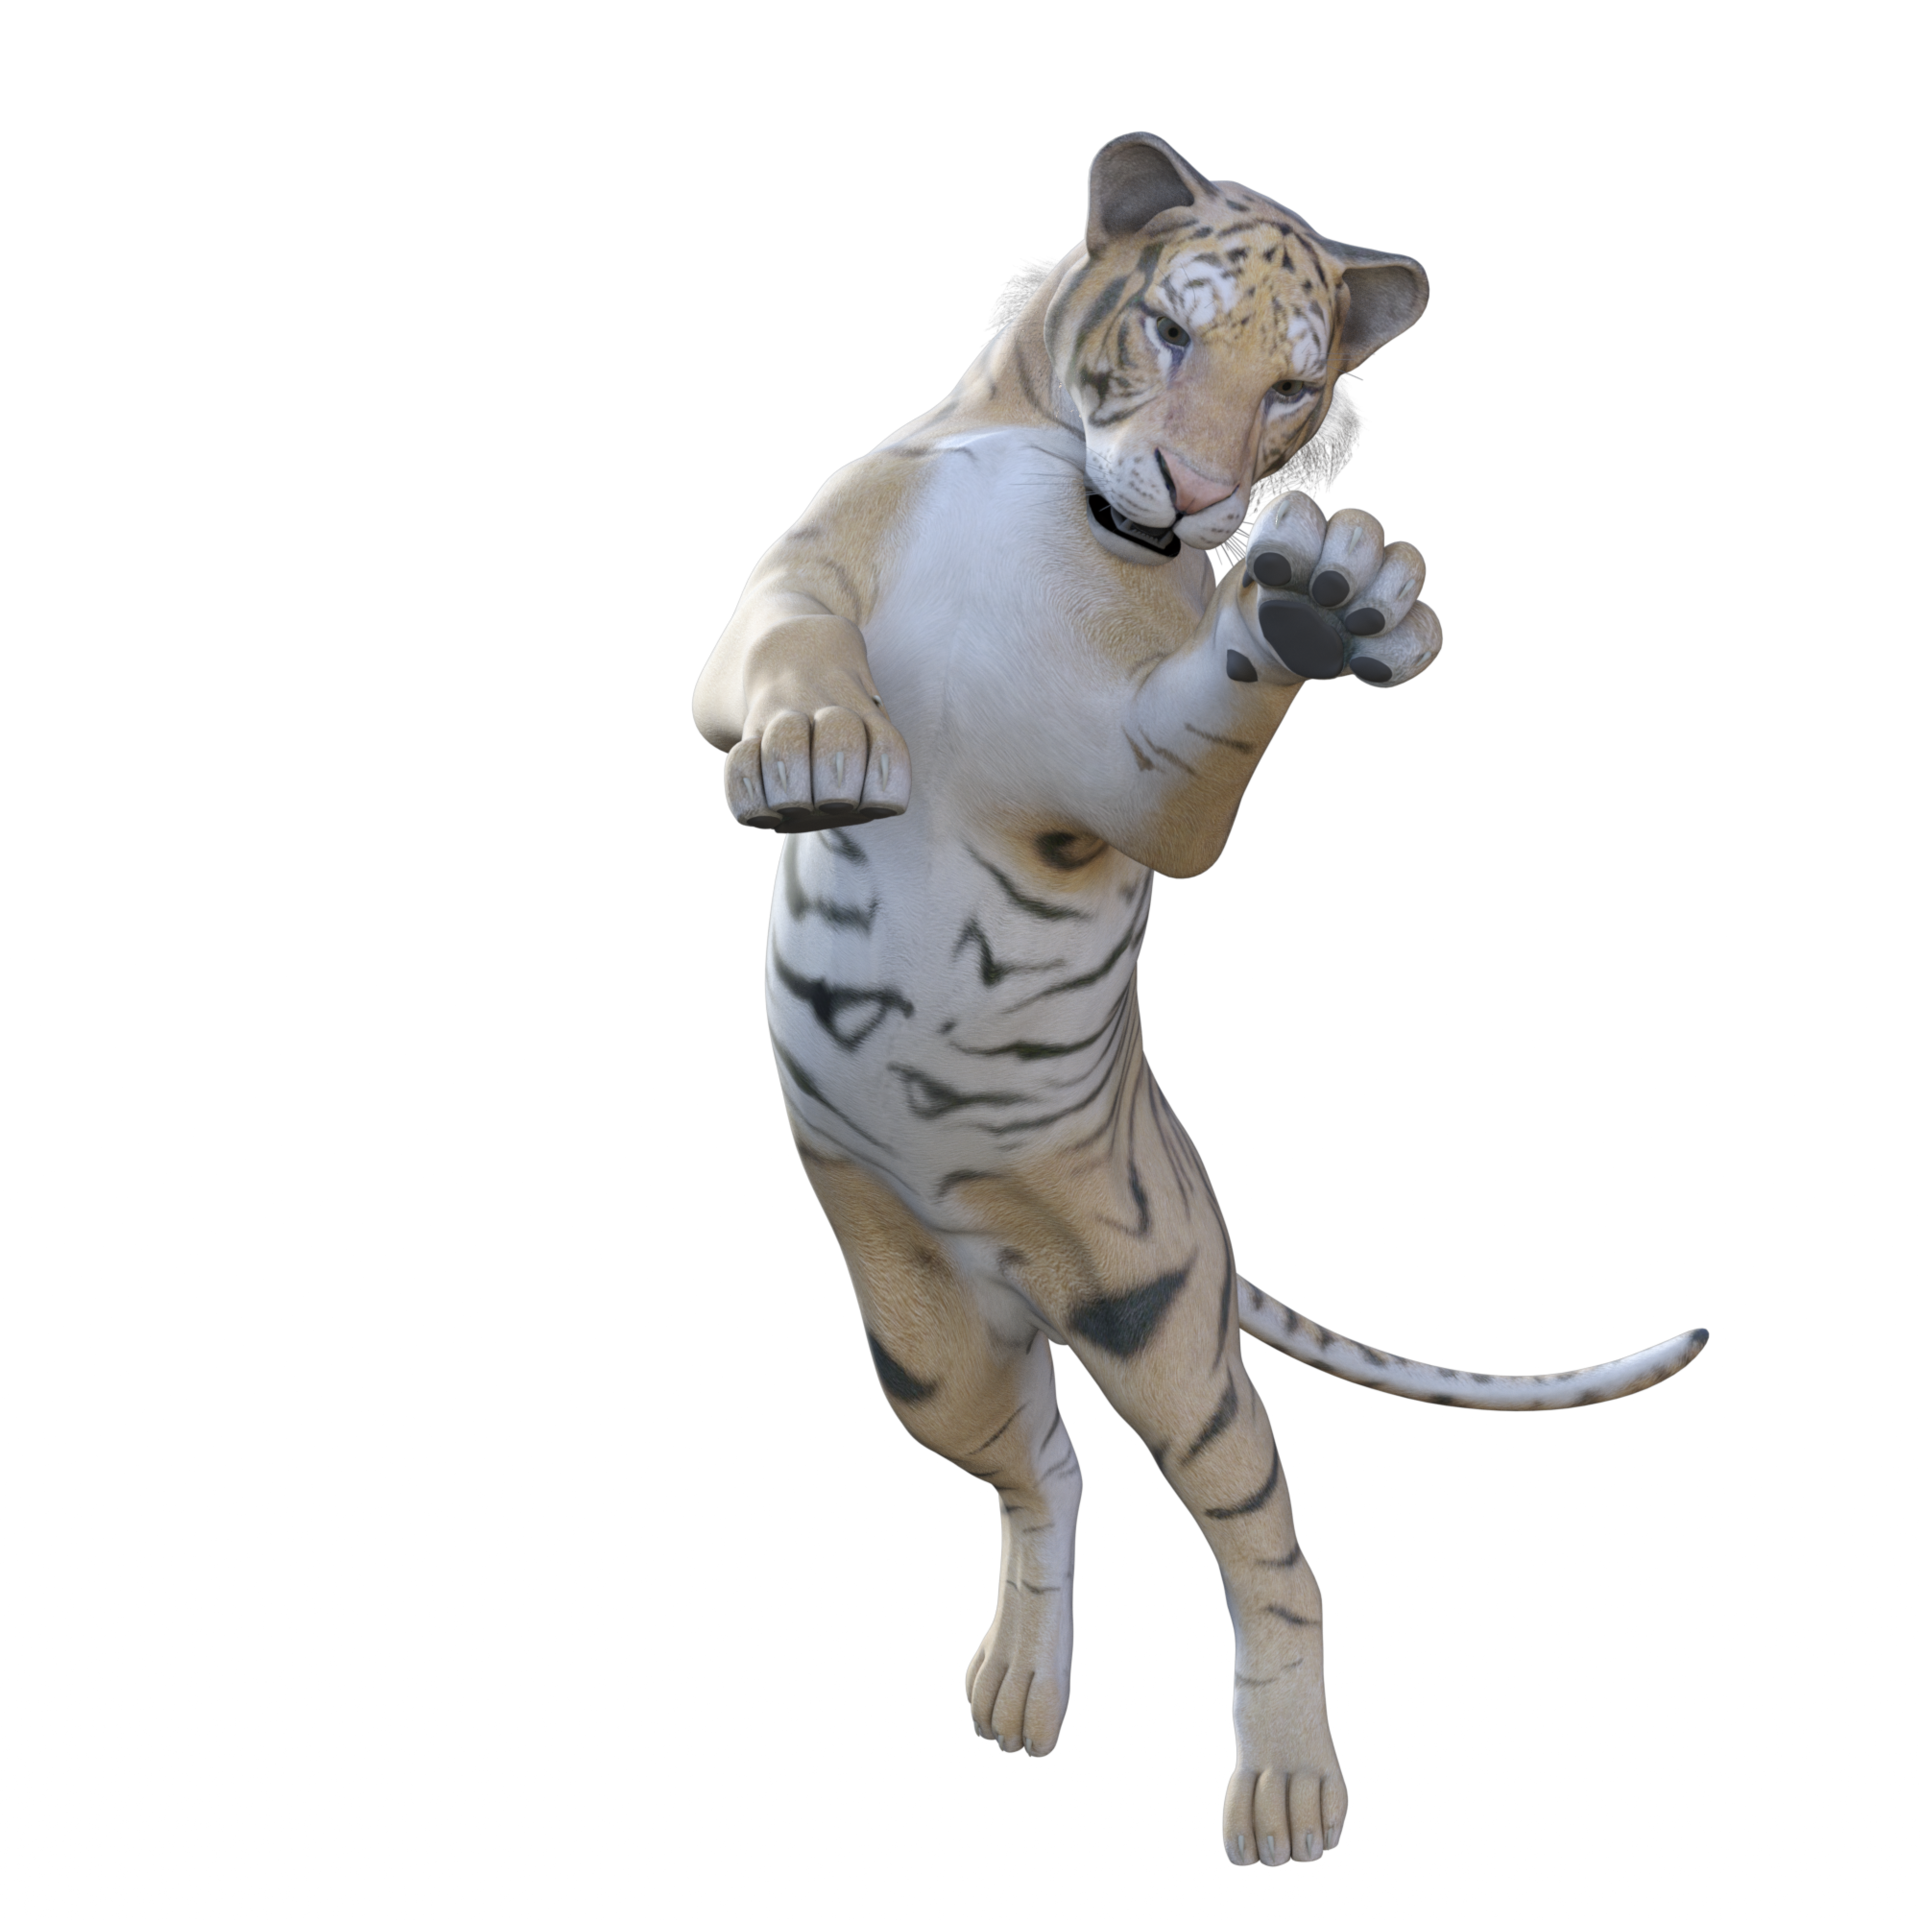 Tiger 3d PNG, On The The Tiger Jumps Out Of The 3d Illustration, 3d Art, 3d  Rendering, Background PNG Image For Free Download